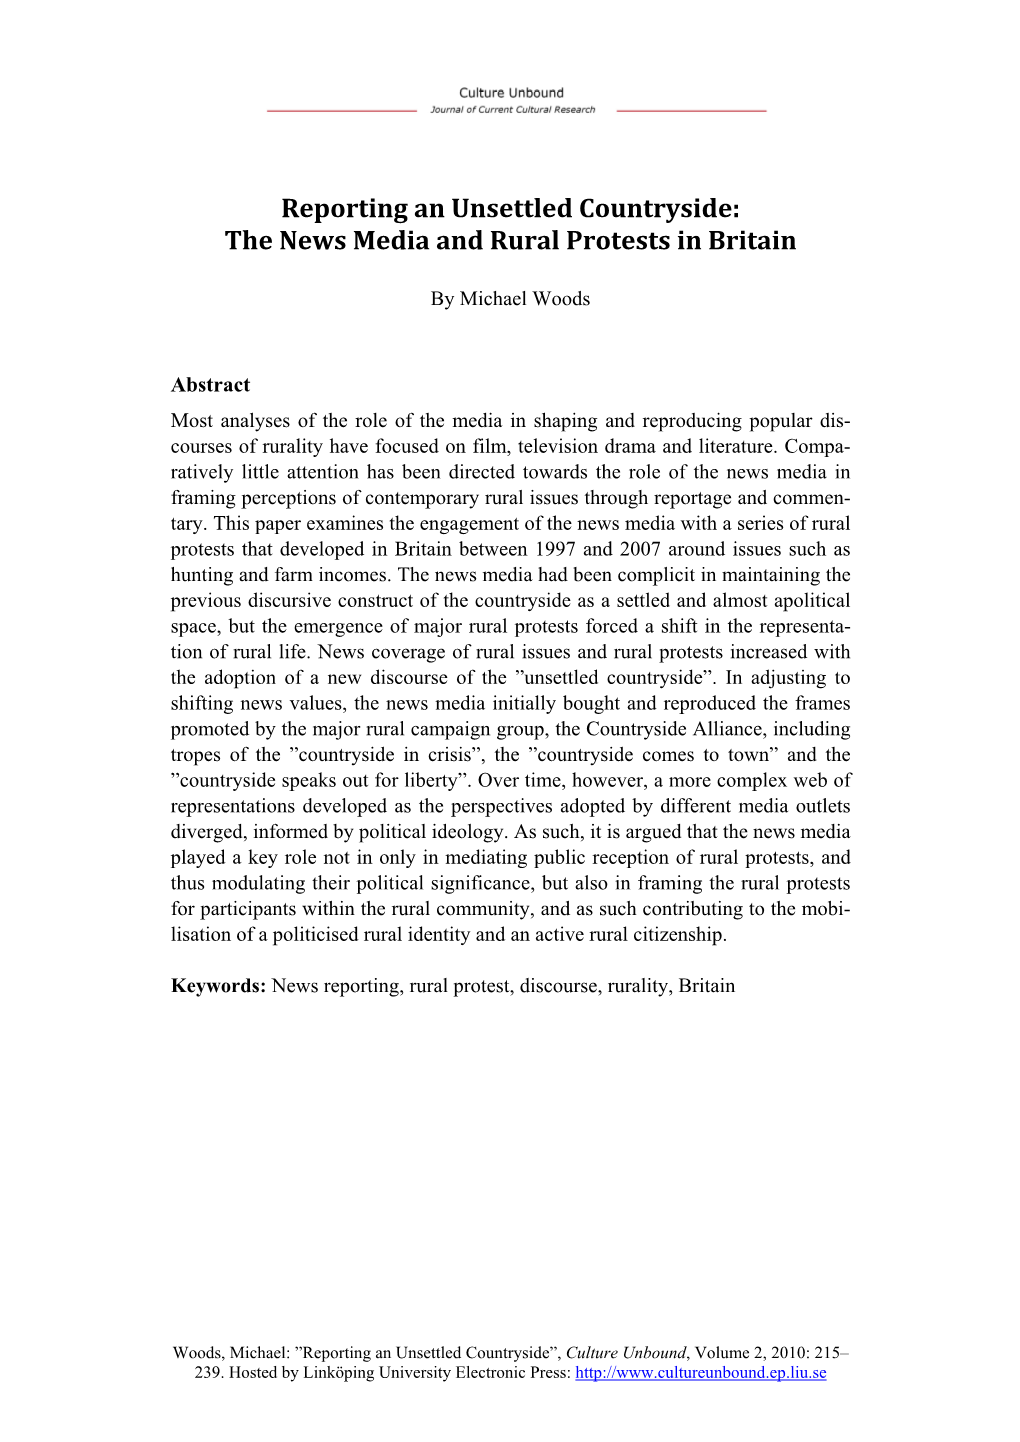 Reporting an Unsettled Countryside: the News Media and Rural Protests in Britain